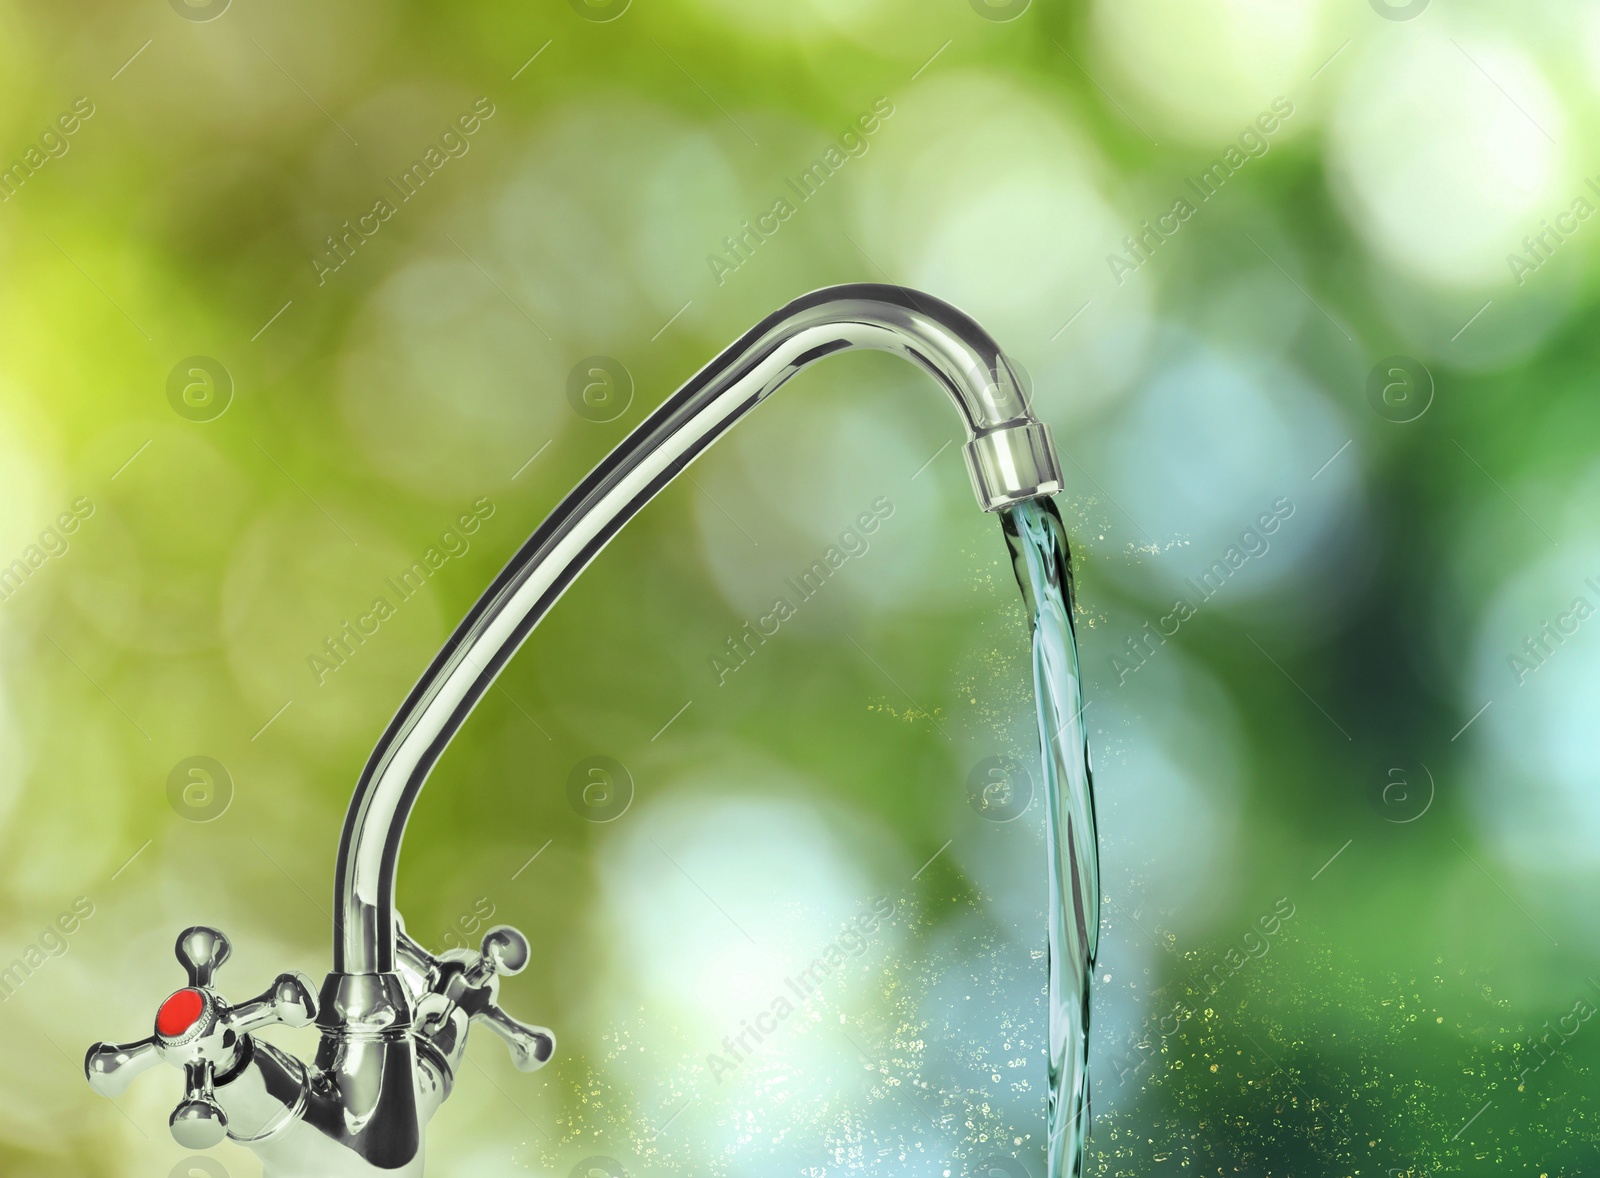 Image of Water flowing from tap outdoors on sunny day, bokeh effect